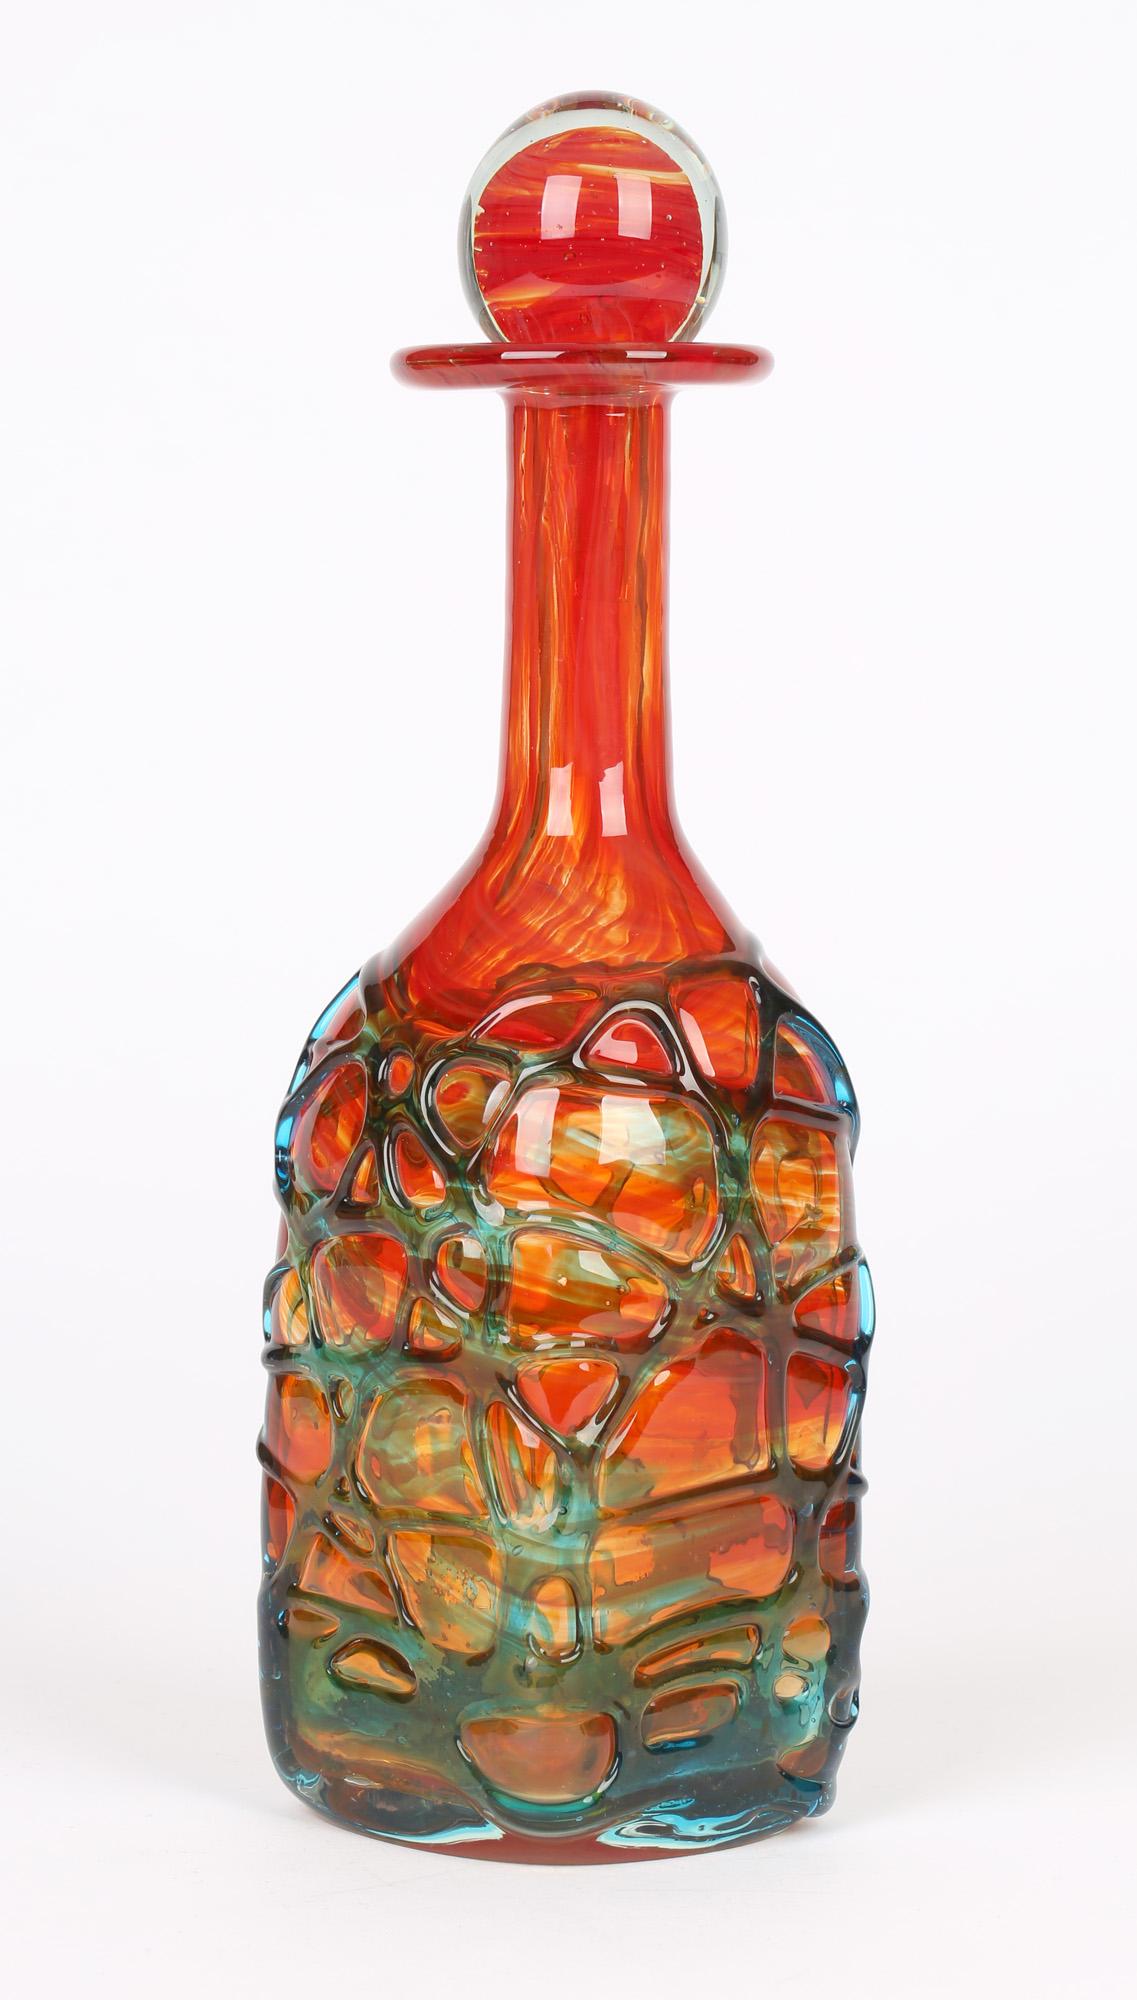 A stylish square shaped Maltese art glass decanter with stopper in a cased mottled orange color with blue glass trailing to the body. The decanter has a square shaped body standing on a flat polished base and has a narrow rounded neck with a wide